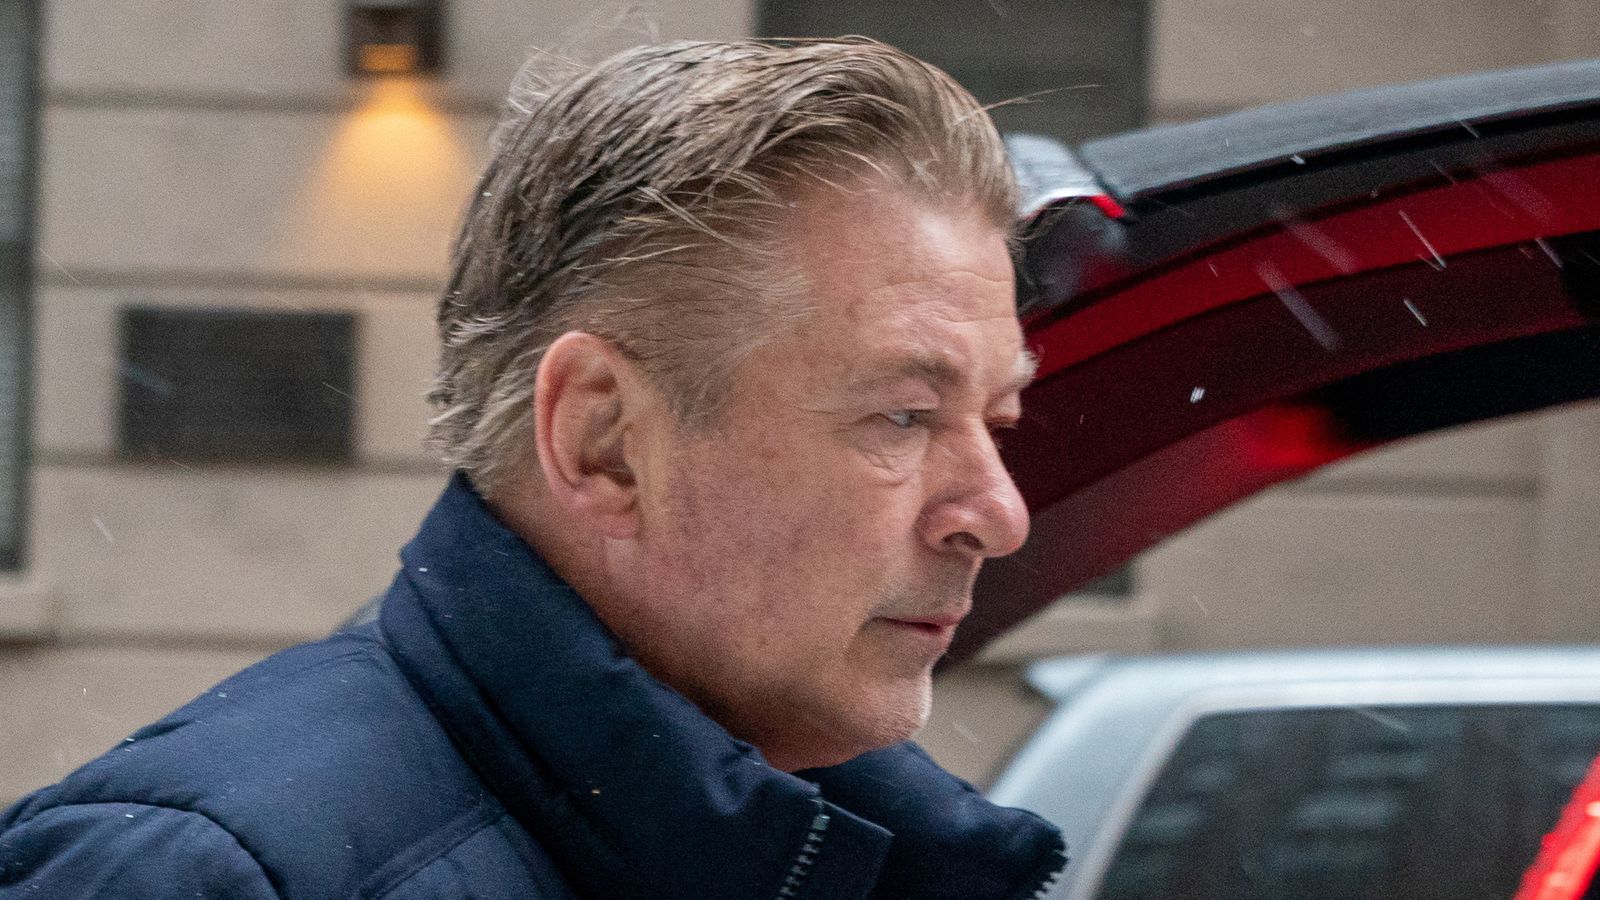 Alec Baldwin asks judge to dismiss manslaughter charges over Rust shooting